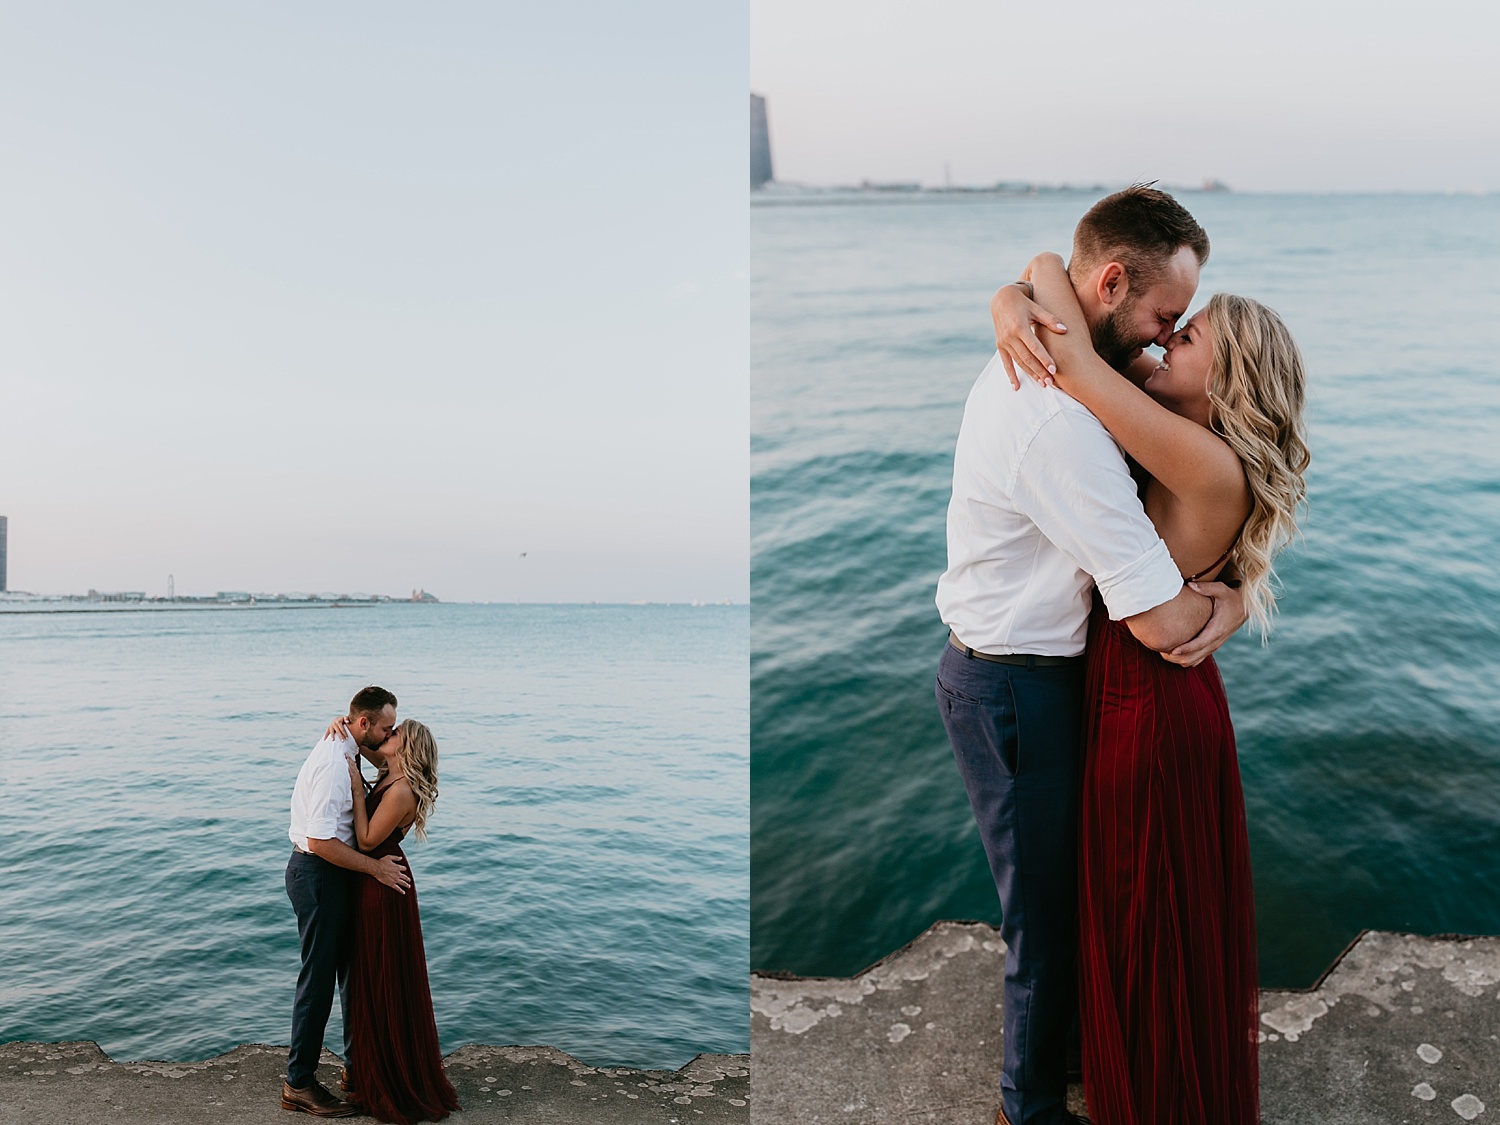 Chicago Engagement Photos, downtown Chicago engagement photos, urban engagement photos, Chicago engagement photographer, Chicago wedding photographer